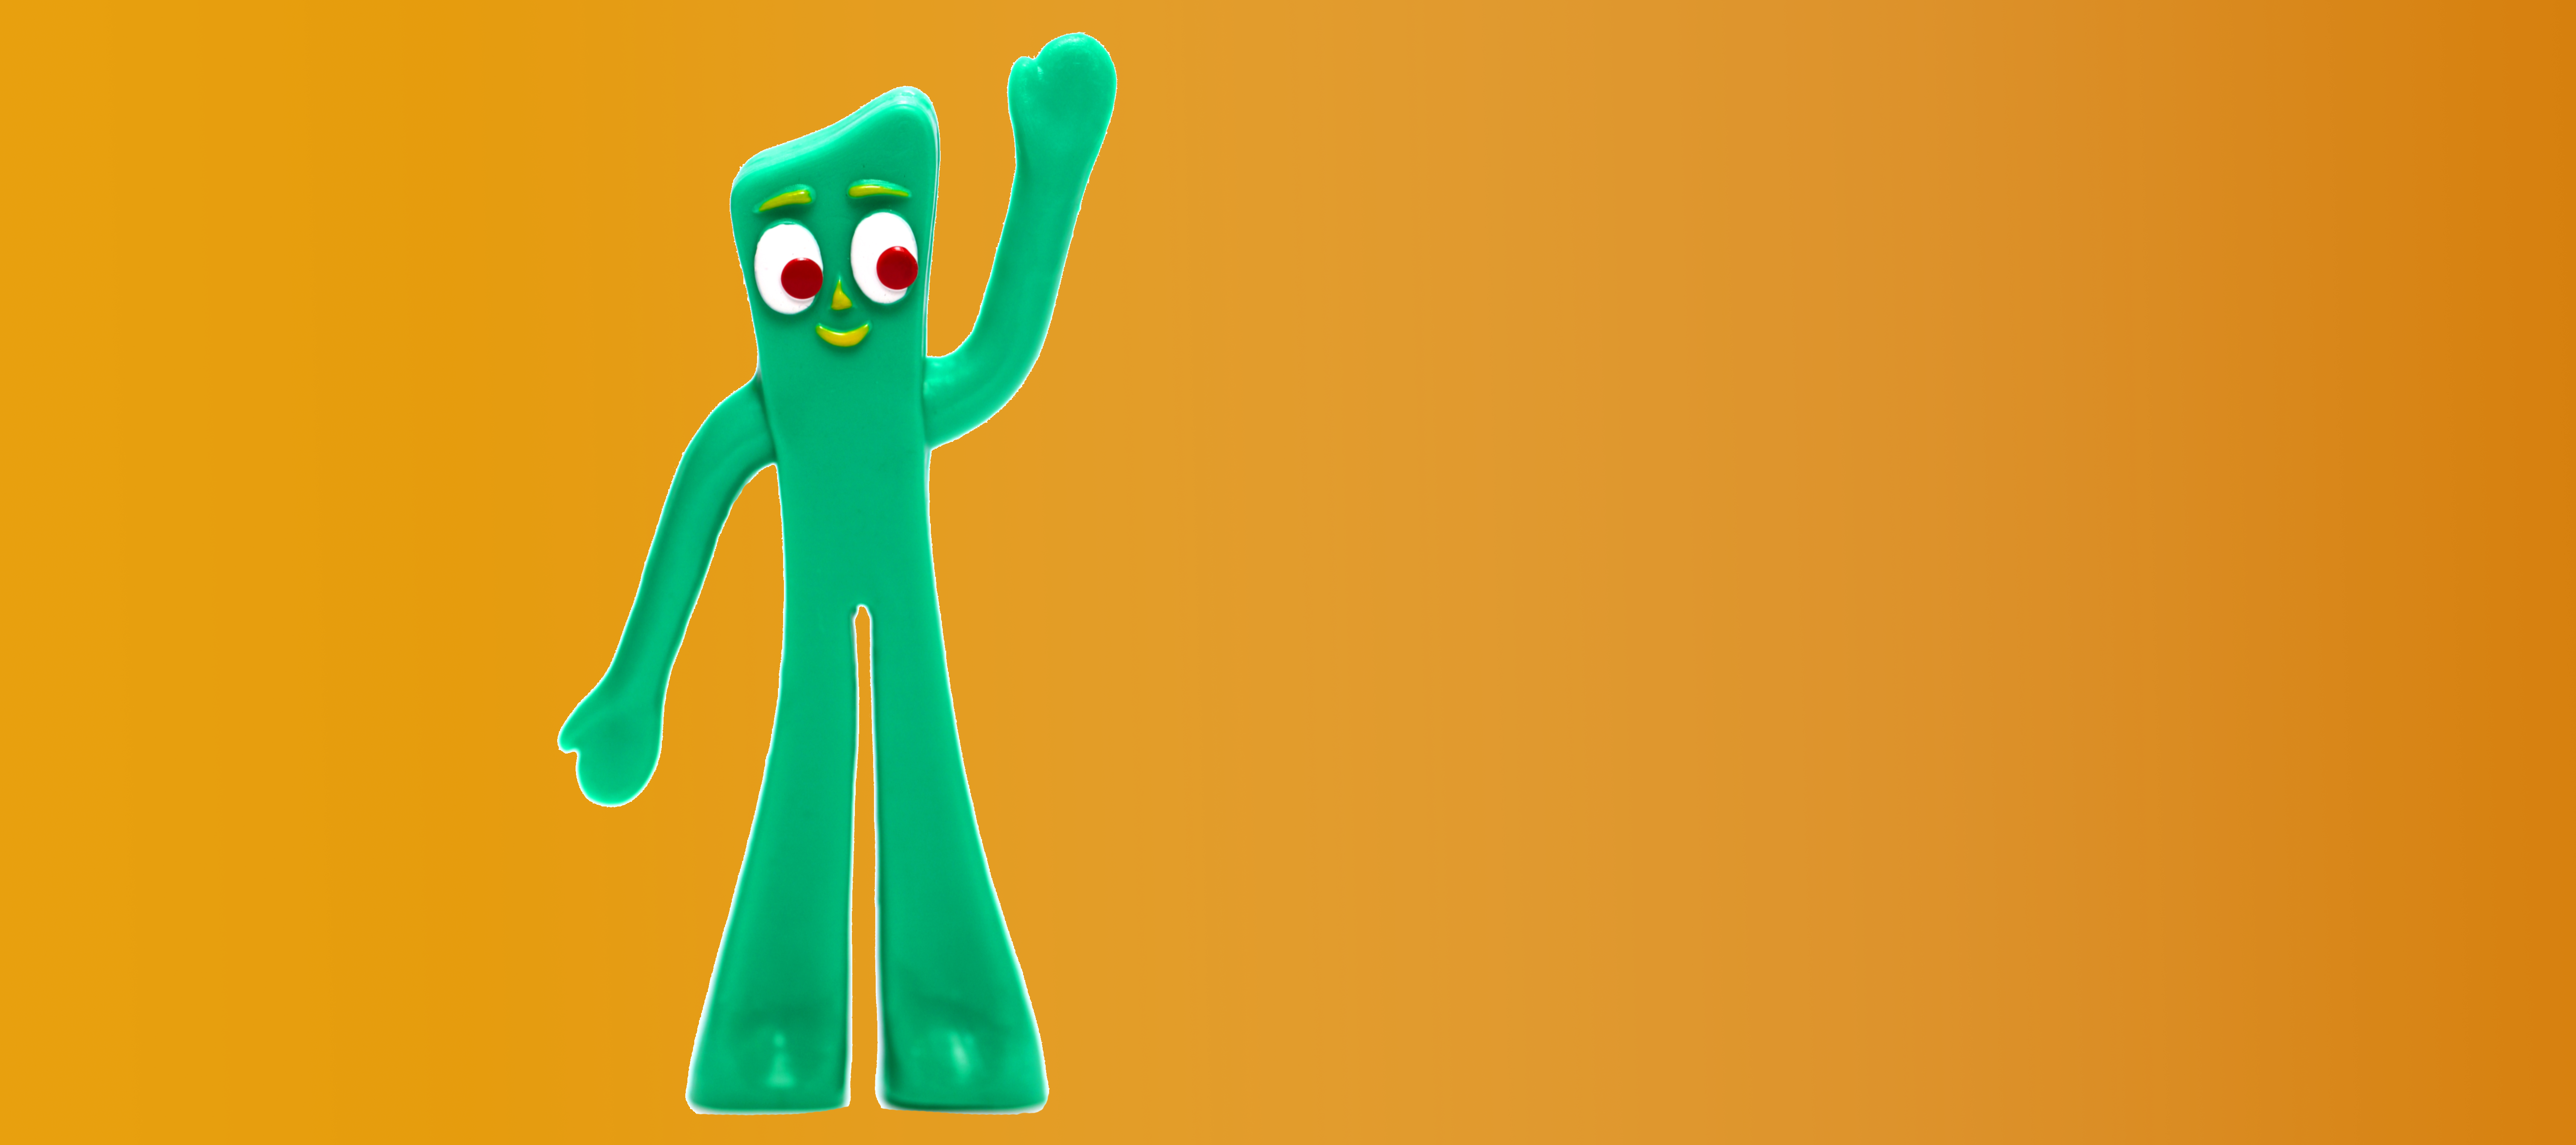 heroic fundraising featured image gumby flexible